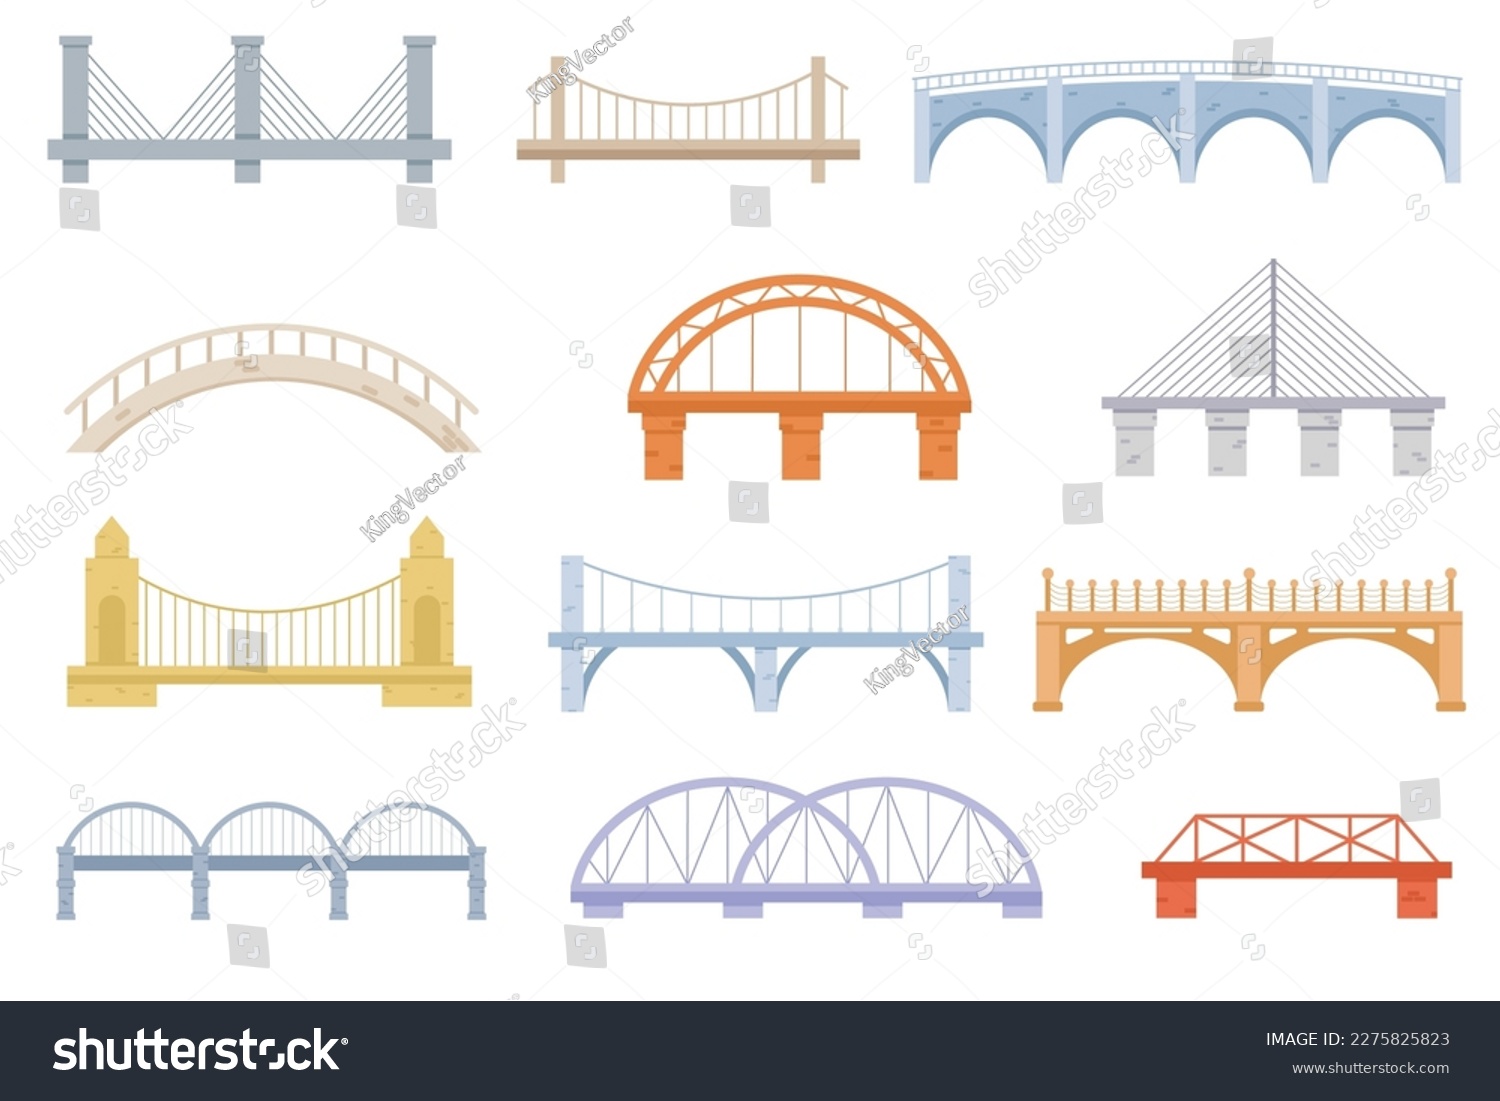 SVG of Bridge of construction vector cartoon set icon. Color graphic design. Set of Bridges, Urban Crossover Architecture and Construction for Transportation with Carriageway svg